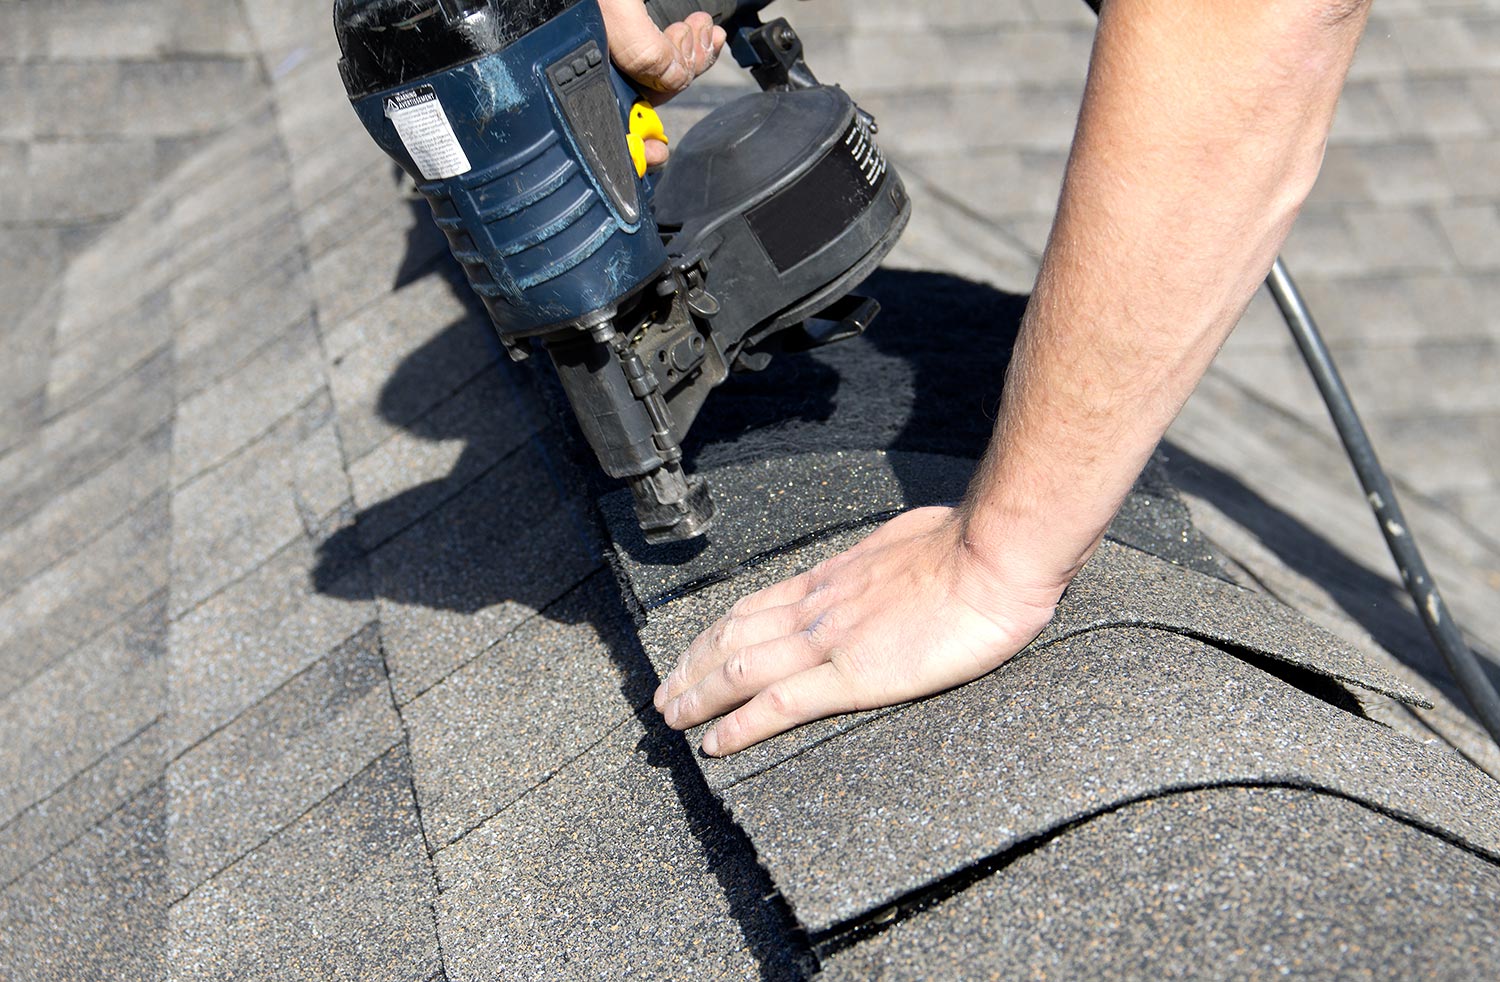 A roofer nails shingles over ridge vent material used on the peak of new residential house construction